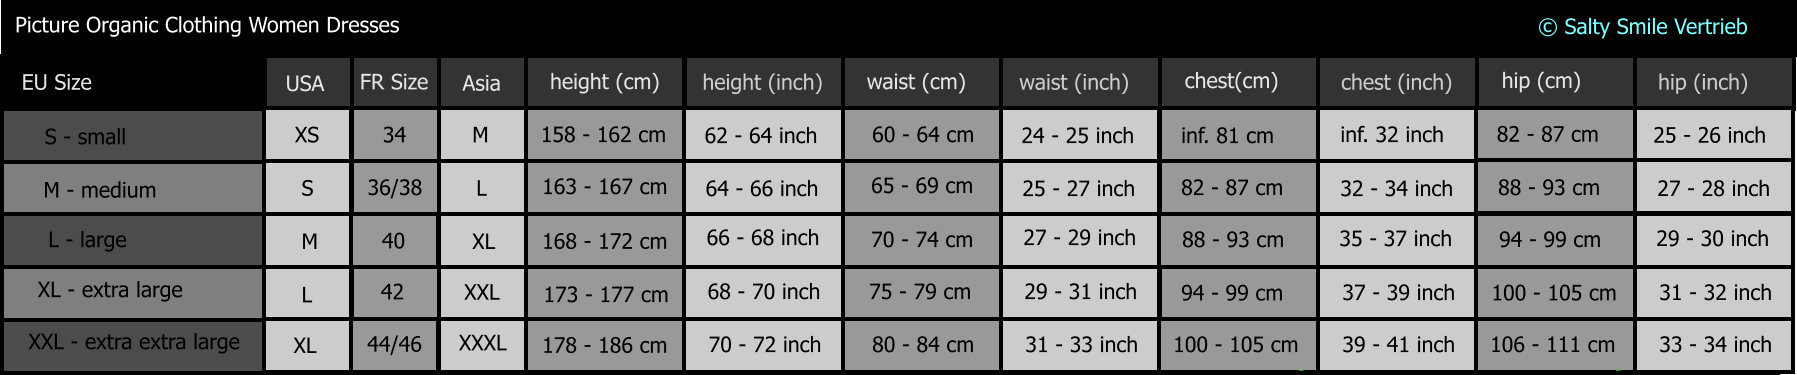 Picture organic clothing women dresses size chart